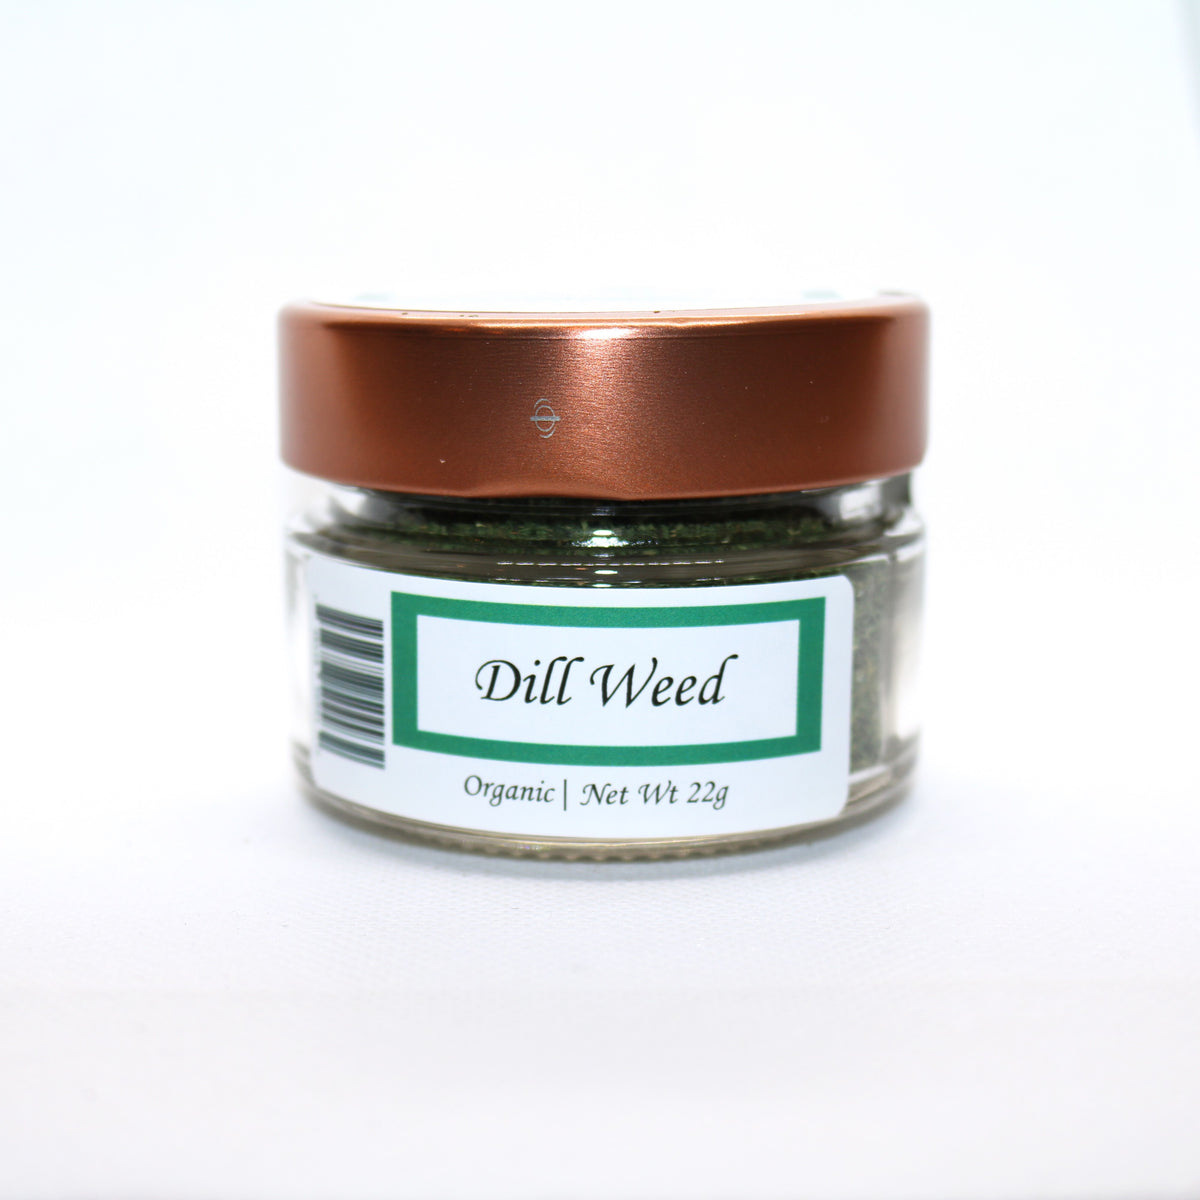 Chalice Spice Organic Dill Weed